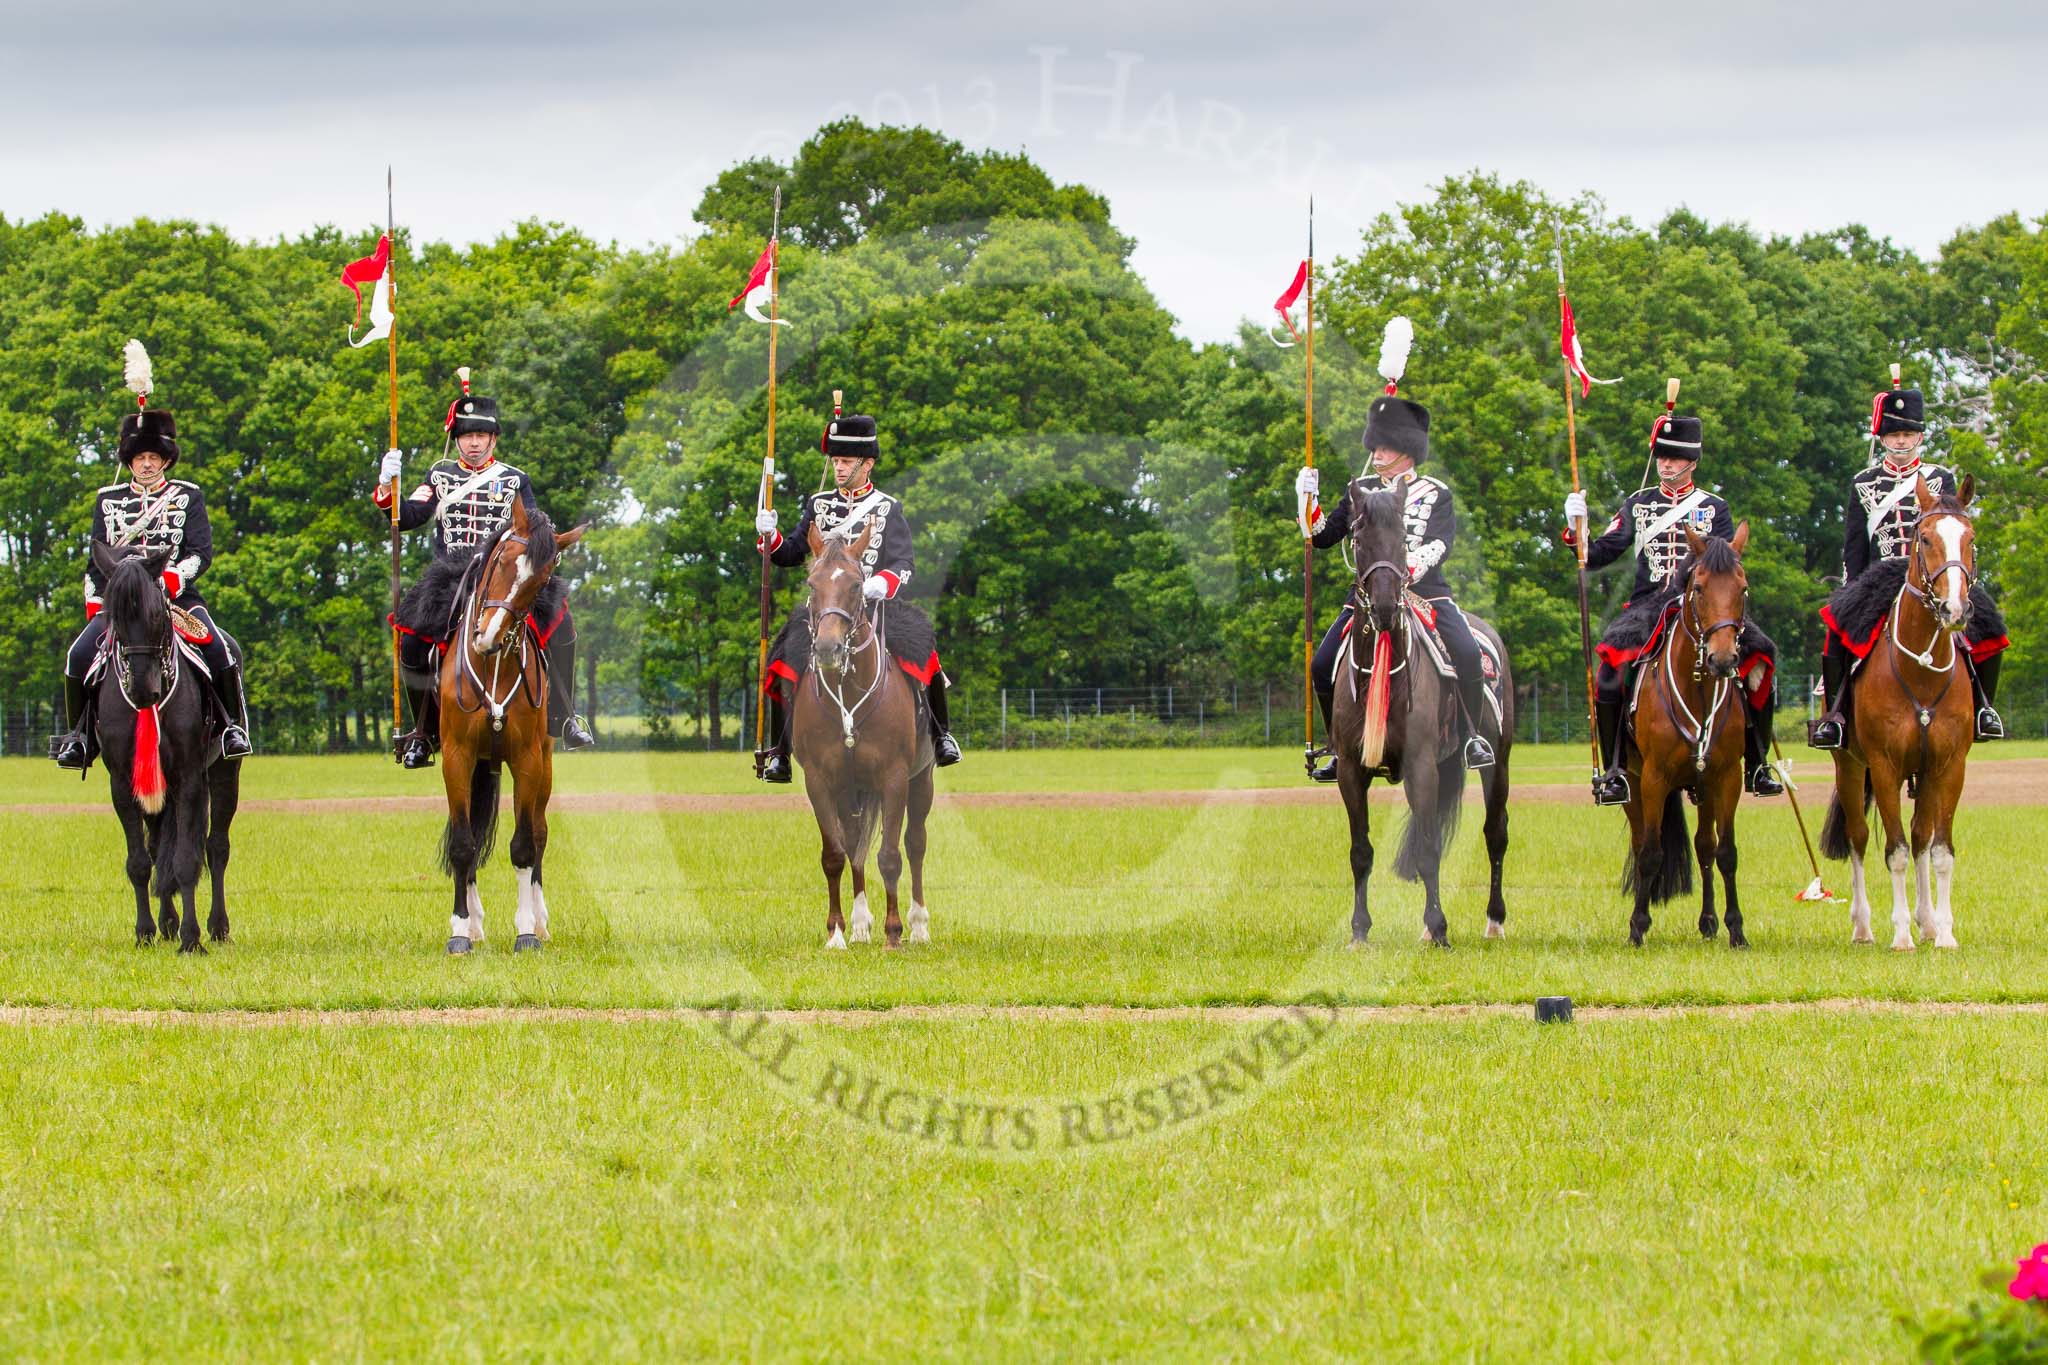 The Light Cavalry HAC Annual Review and Inspection 2013.
Windsor Great Park Review Ground,
Windsor,
Berkshire,
United Kingdom,
on 09 June 2013 at 14:40, image #572